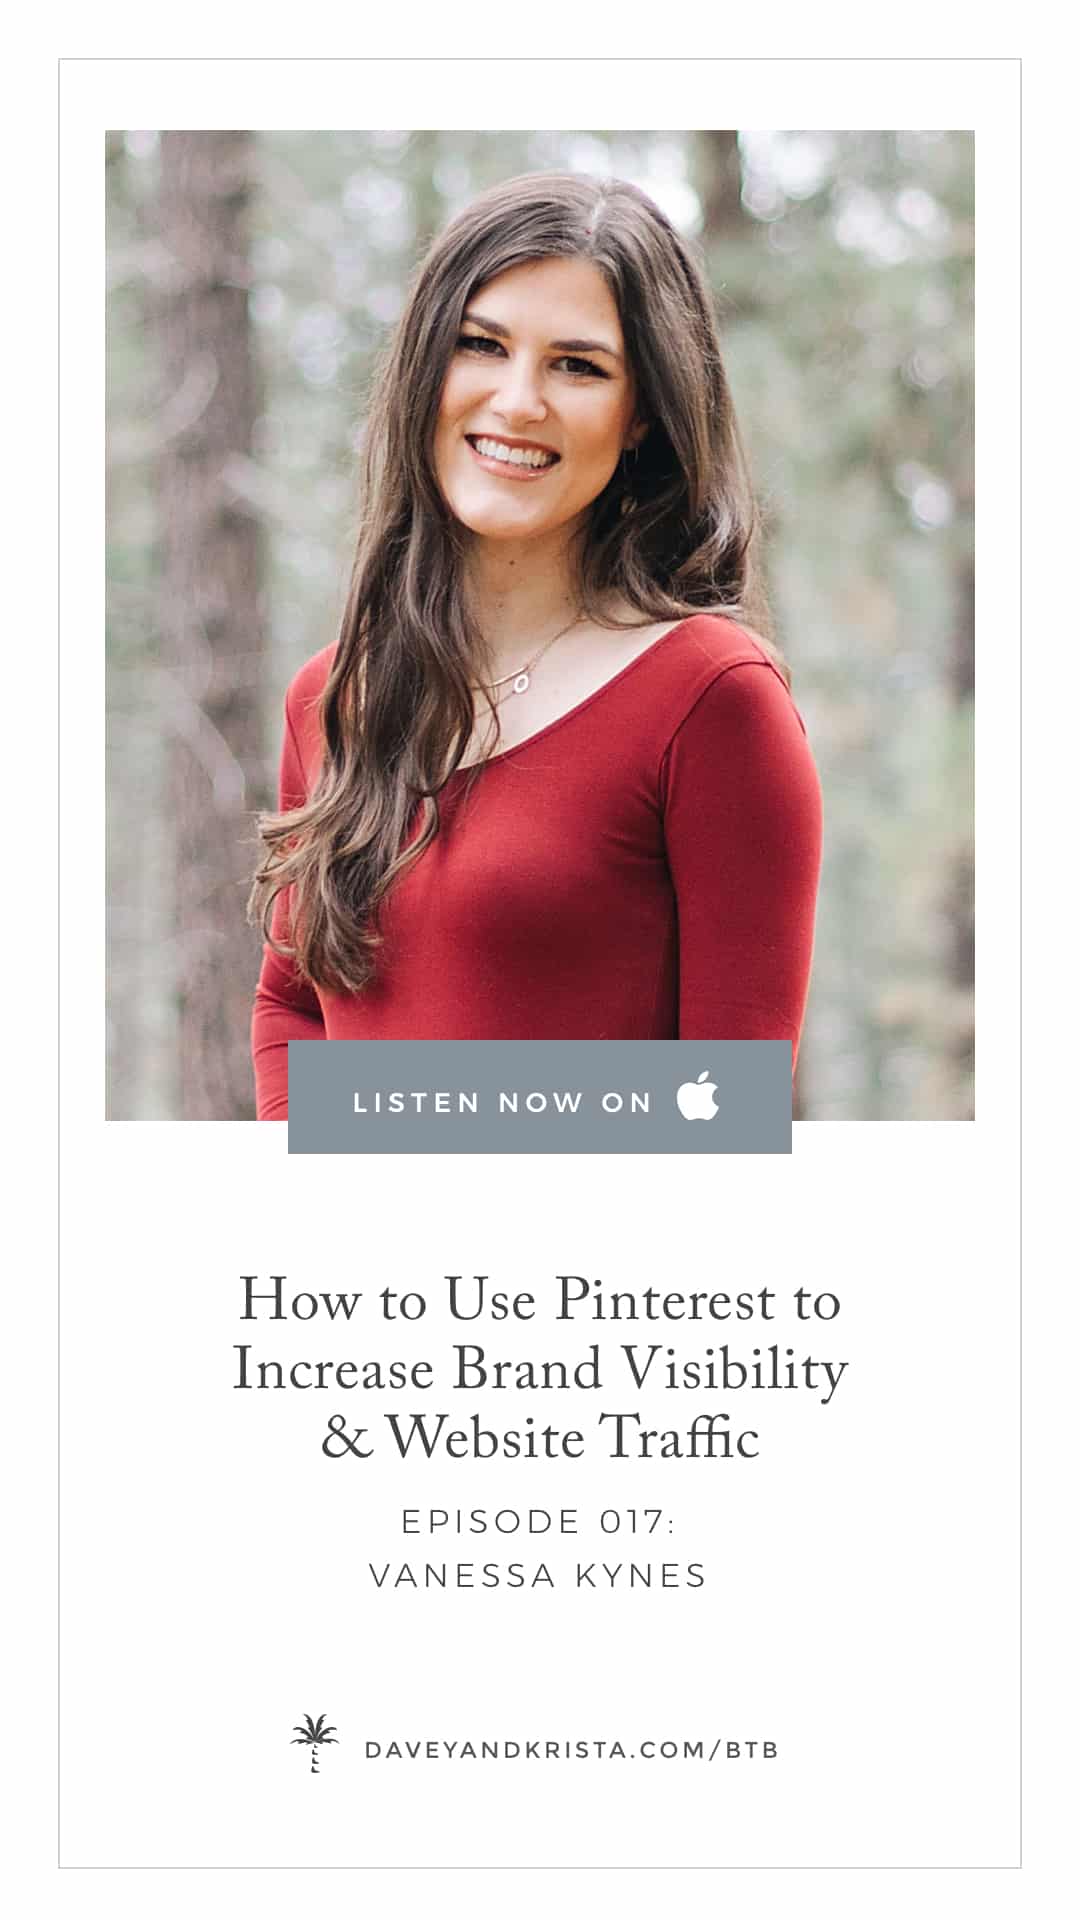 Podcast Interview with Vanessa Kynes - How to use Pinterest to Increase Brand Visibility + Website Traffic | Davey & Krista